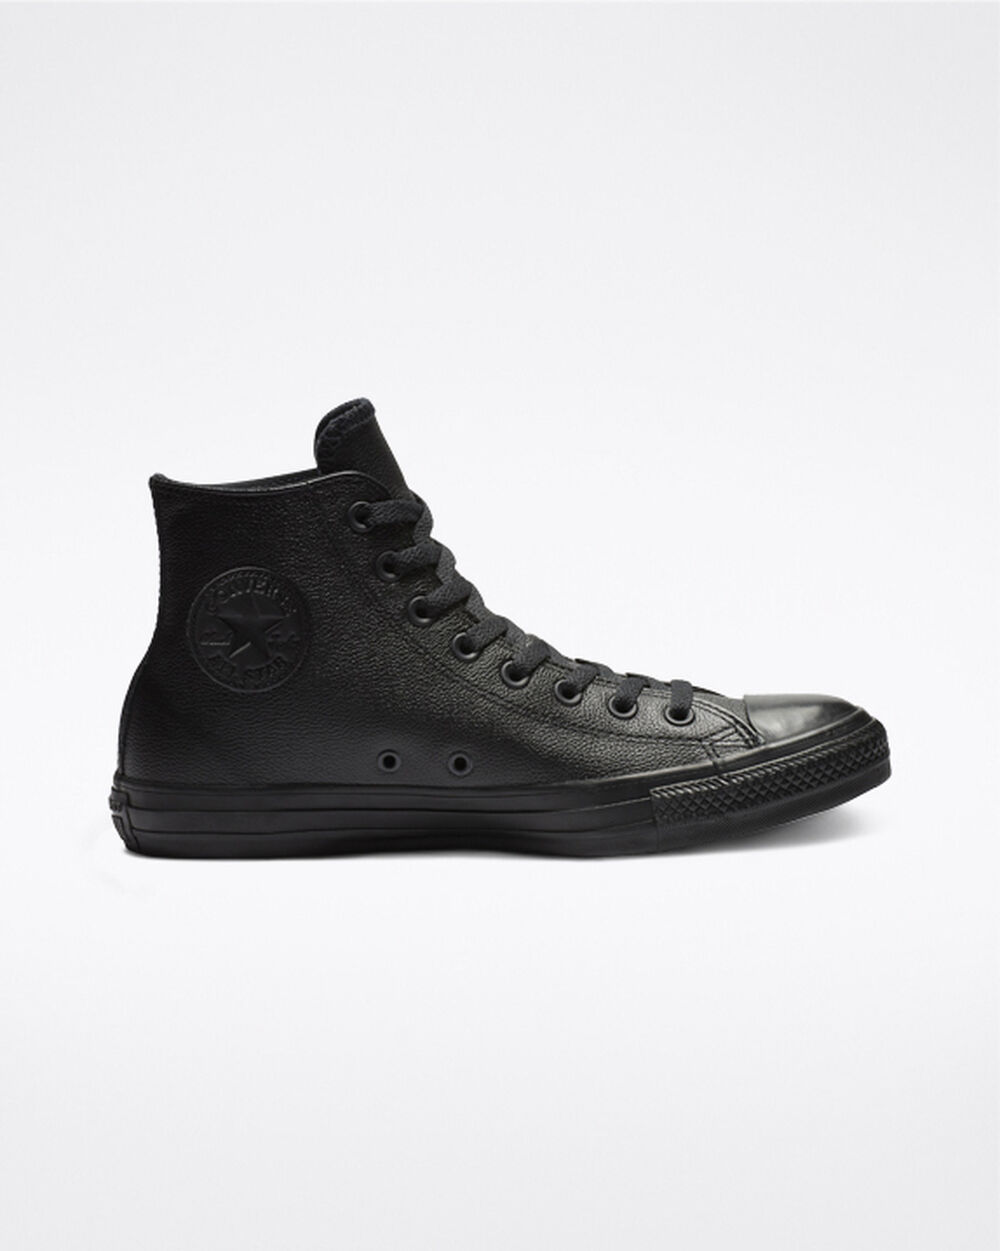 Tenis Converse Chuck Taylor All Star Mujer Negros | Mexico-764636